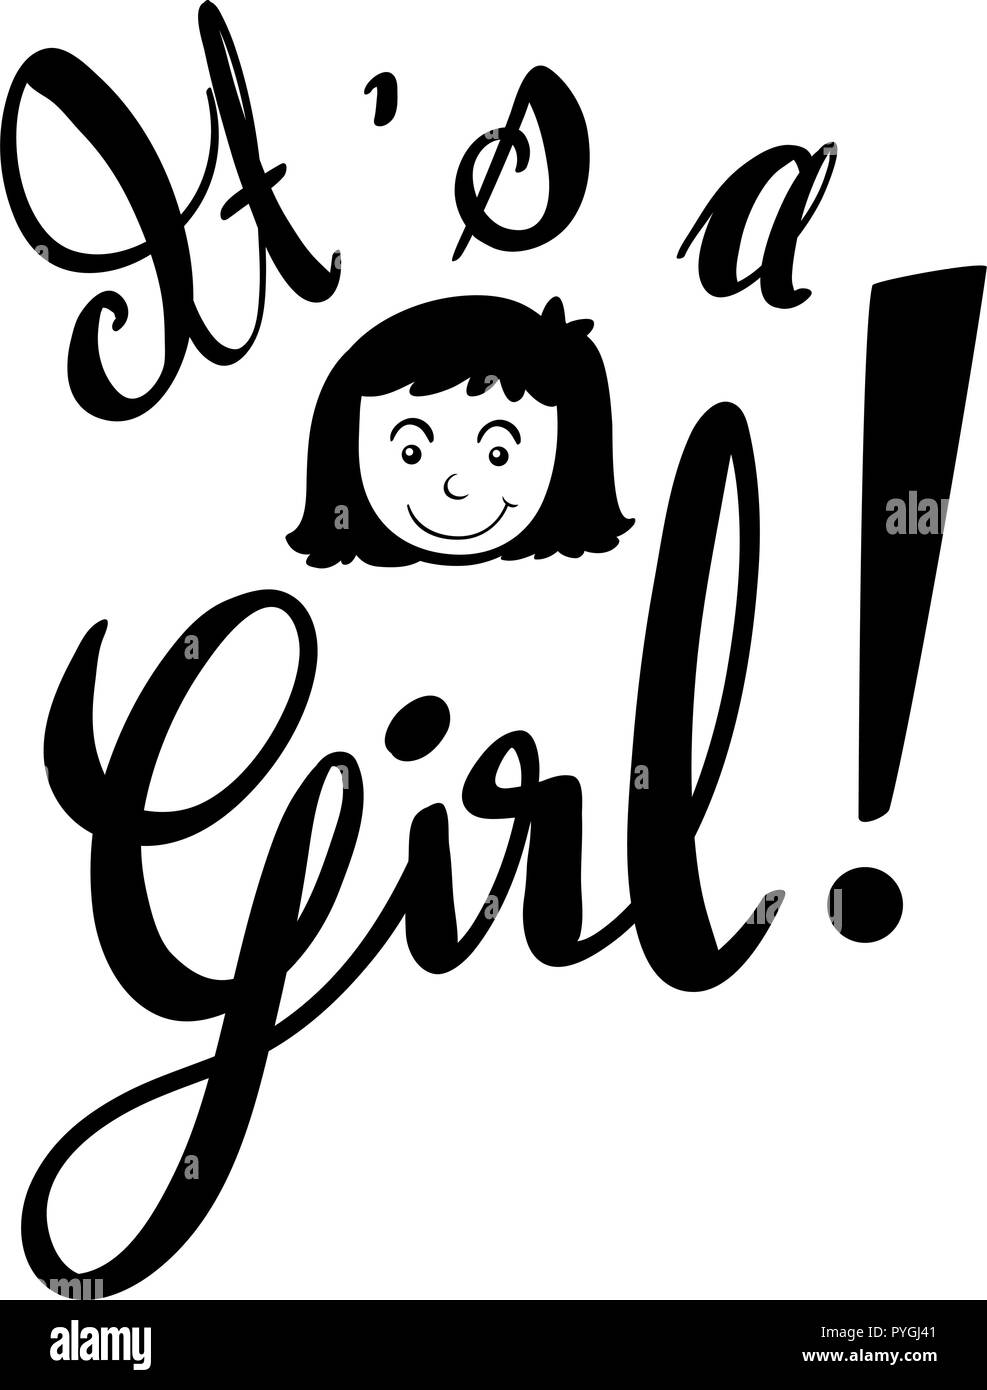 English phrase for it's a girl illustration Stock Vector